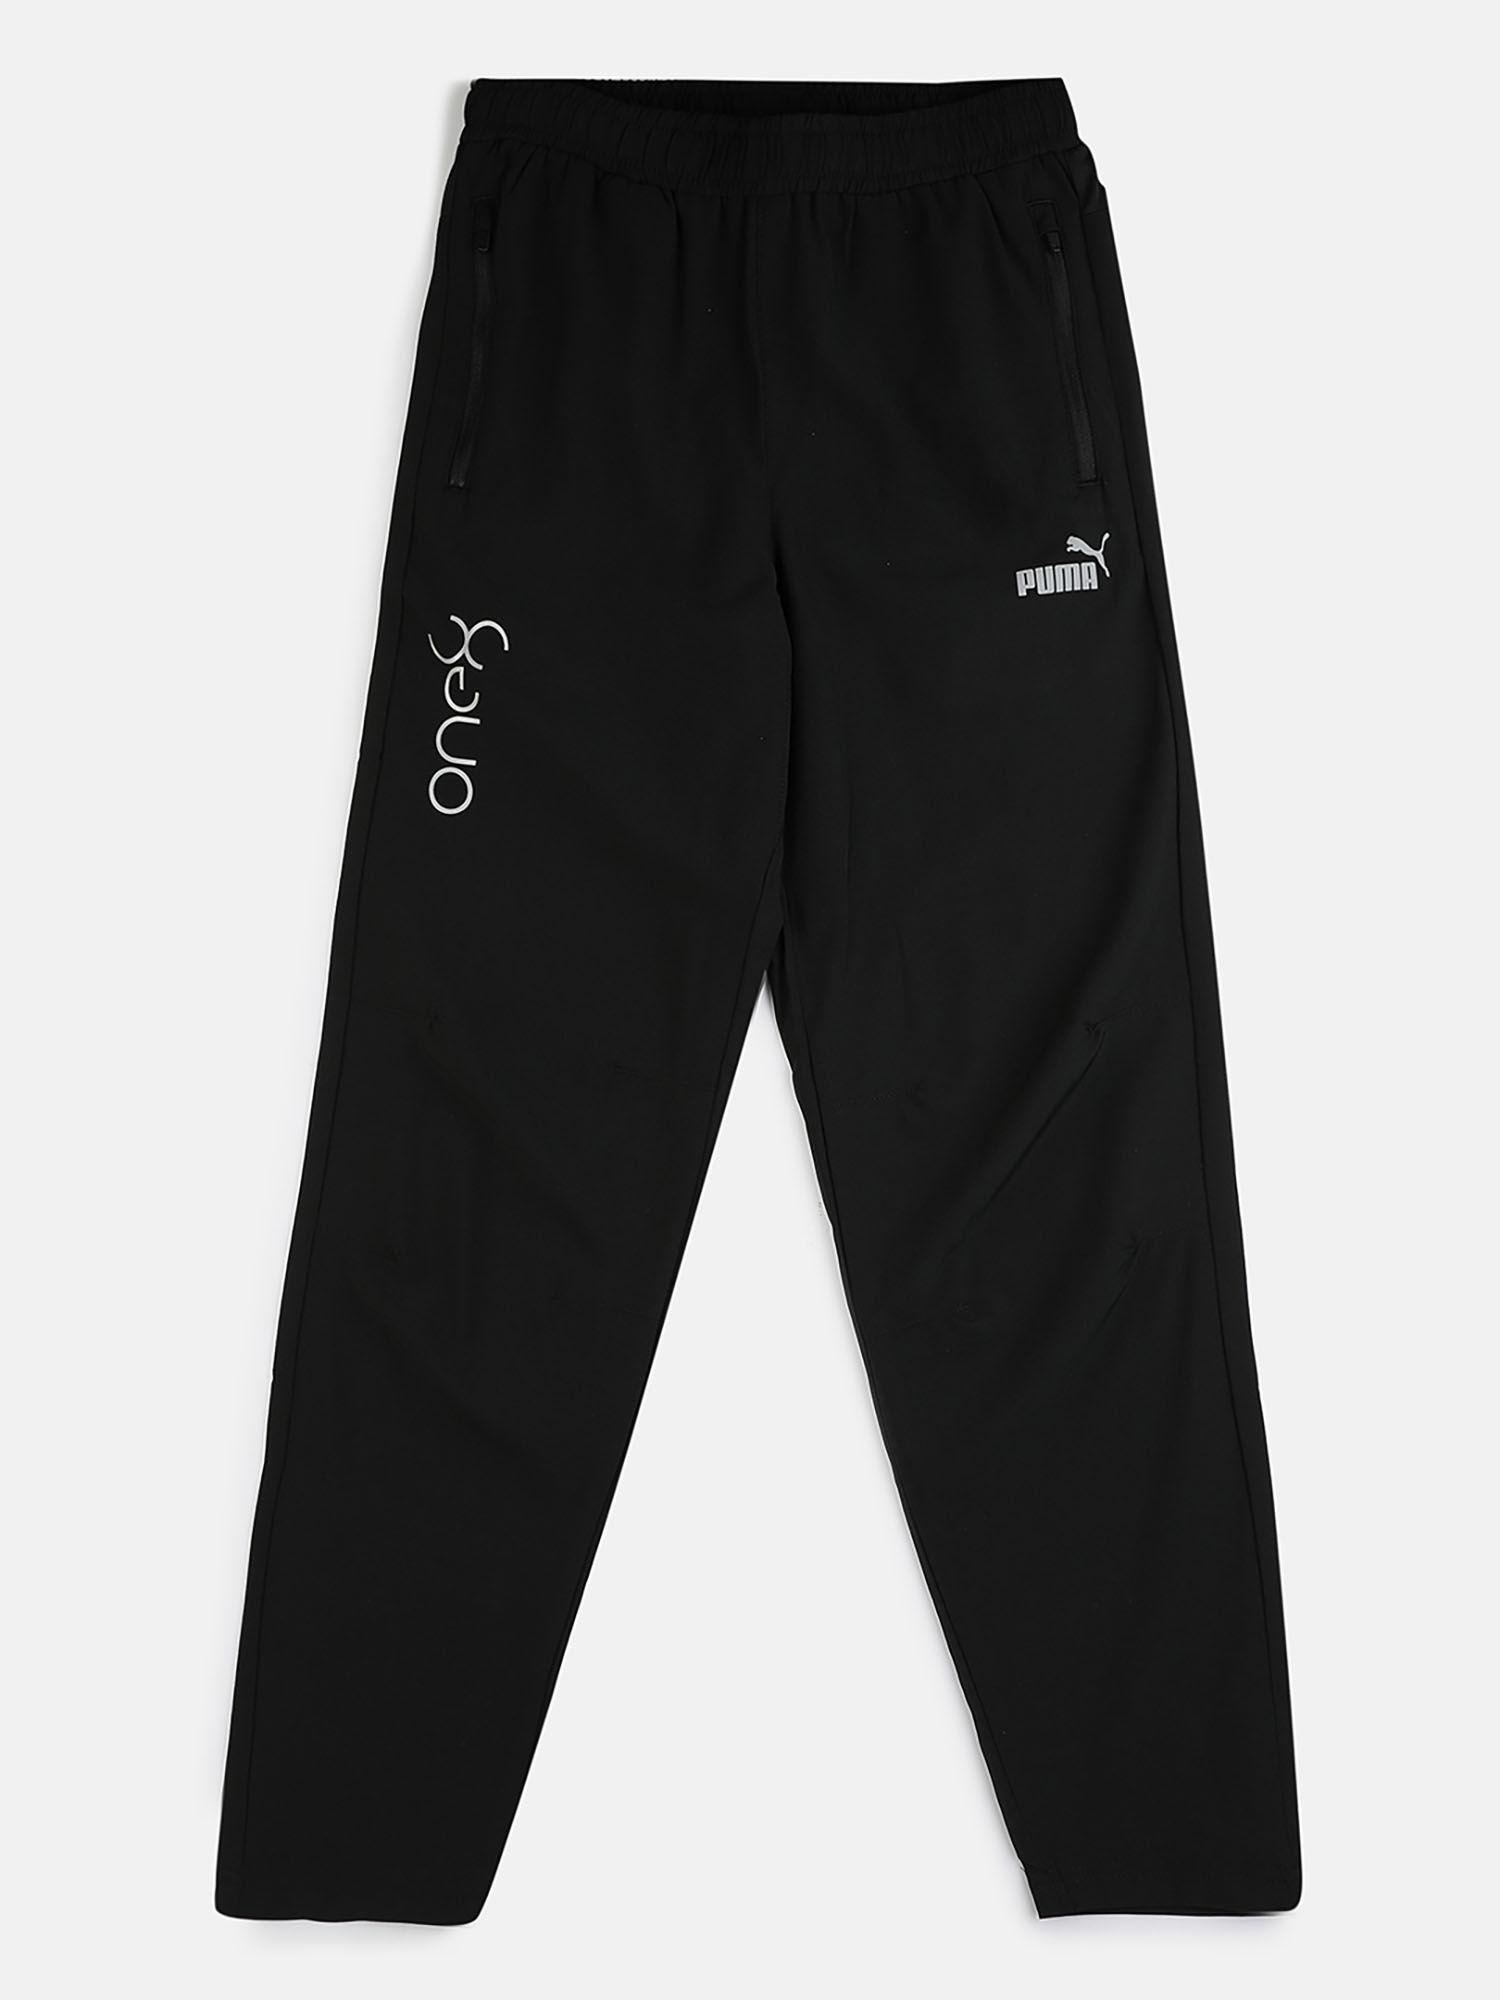 woven boy's black casual track pant